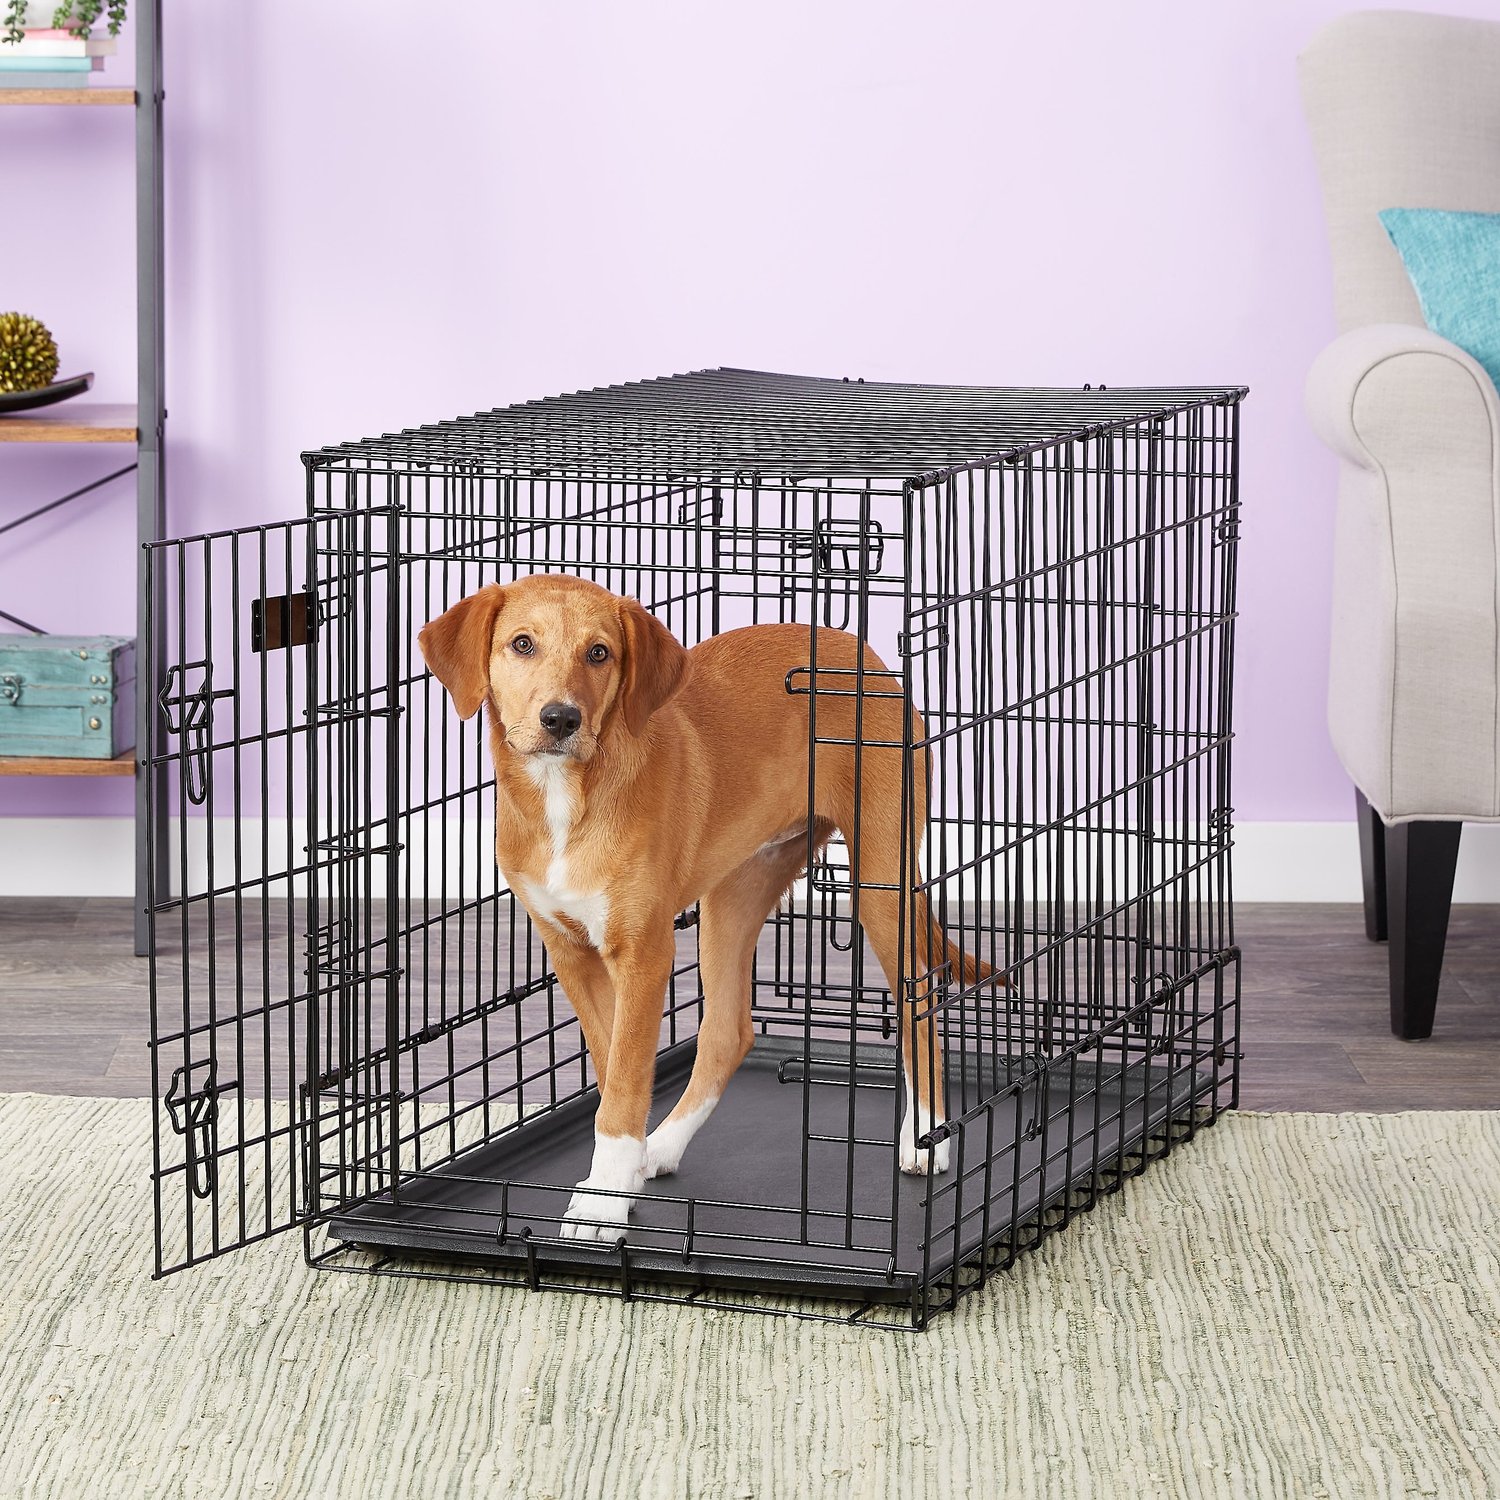 solutions dog crate